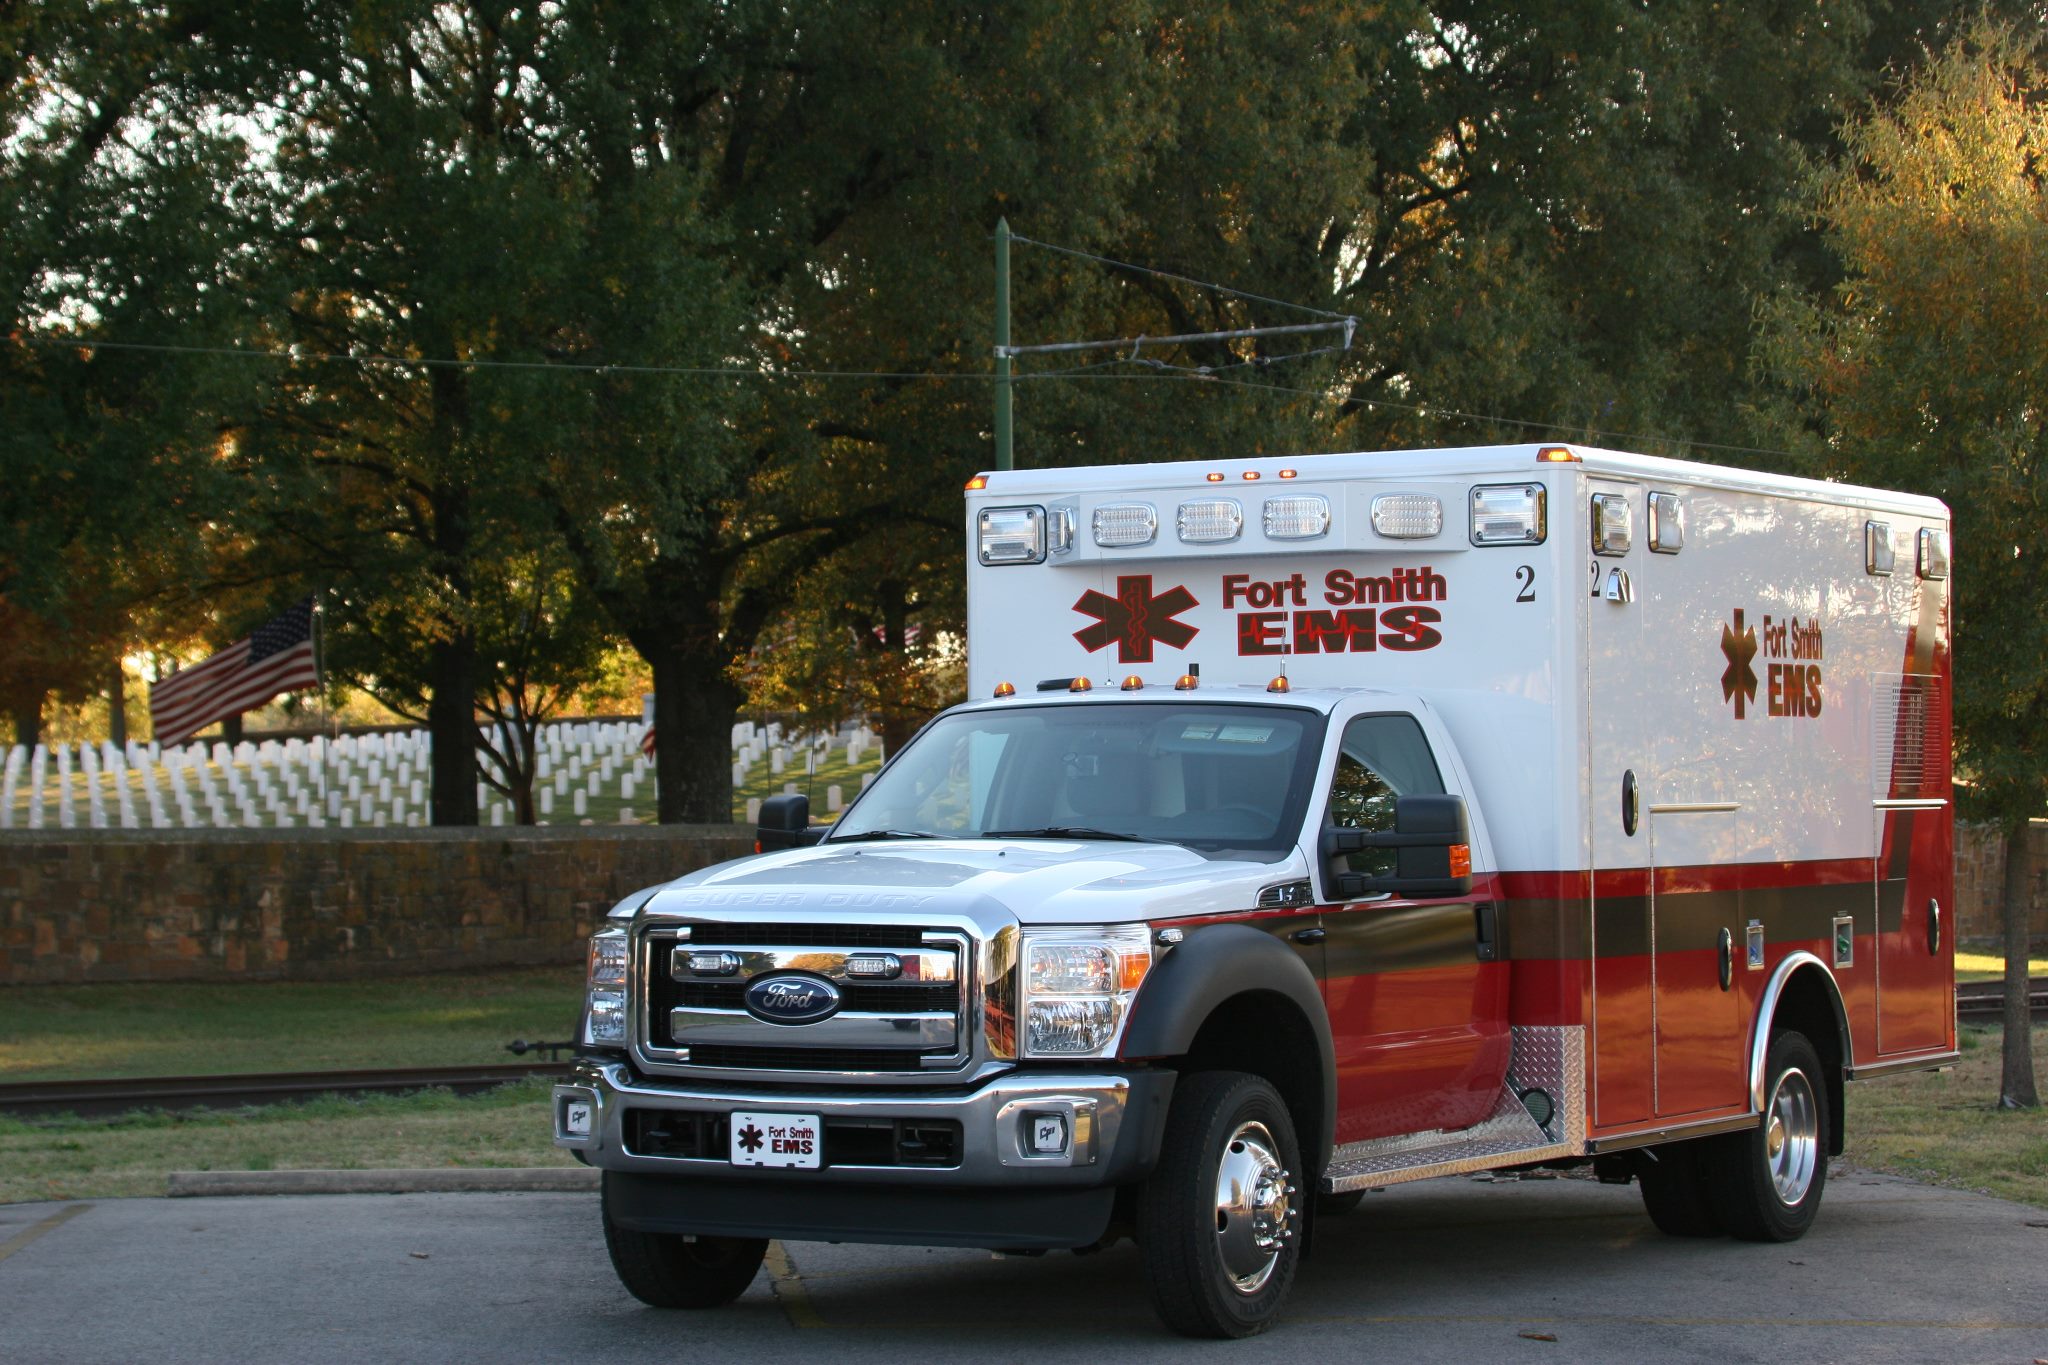 Fort Smith EMS